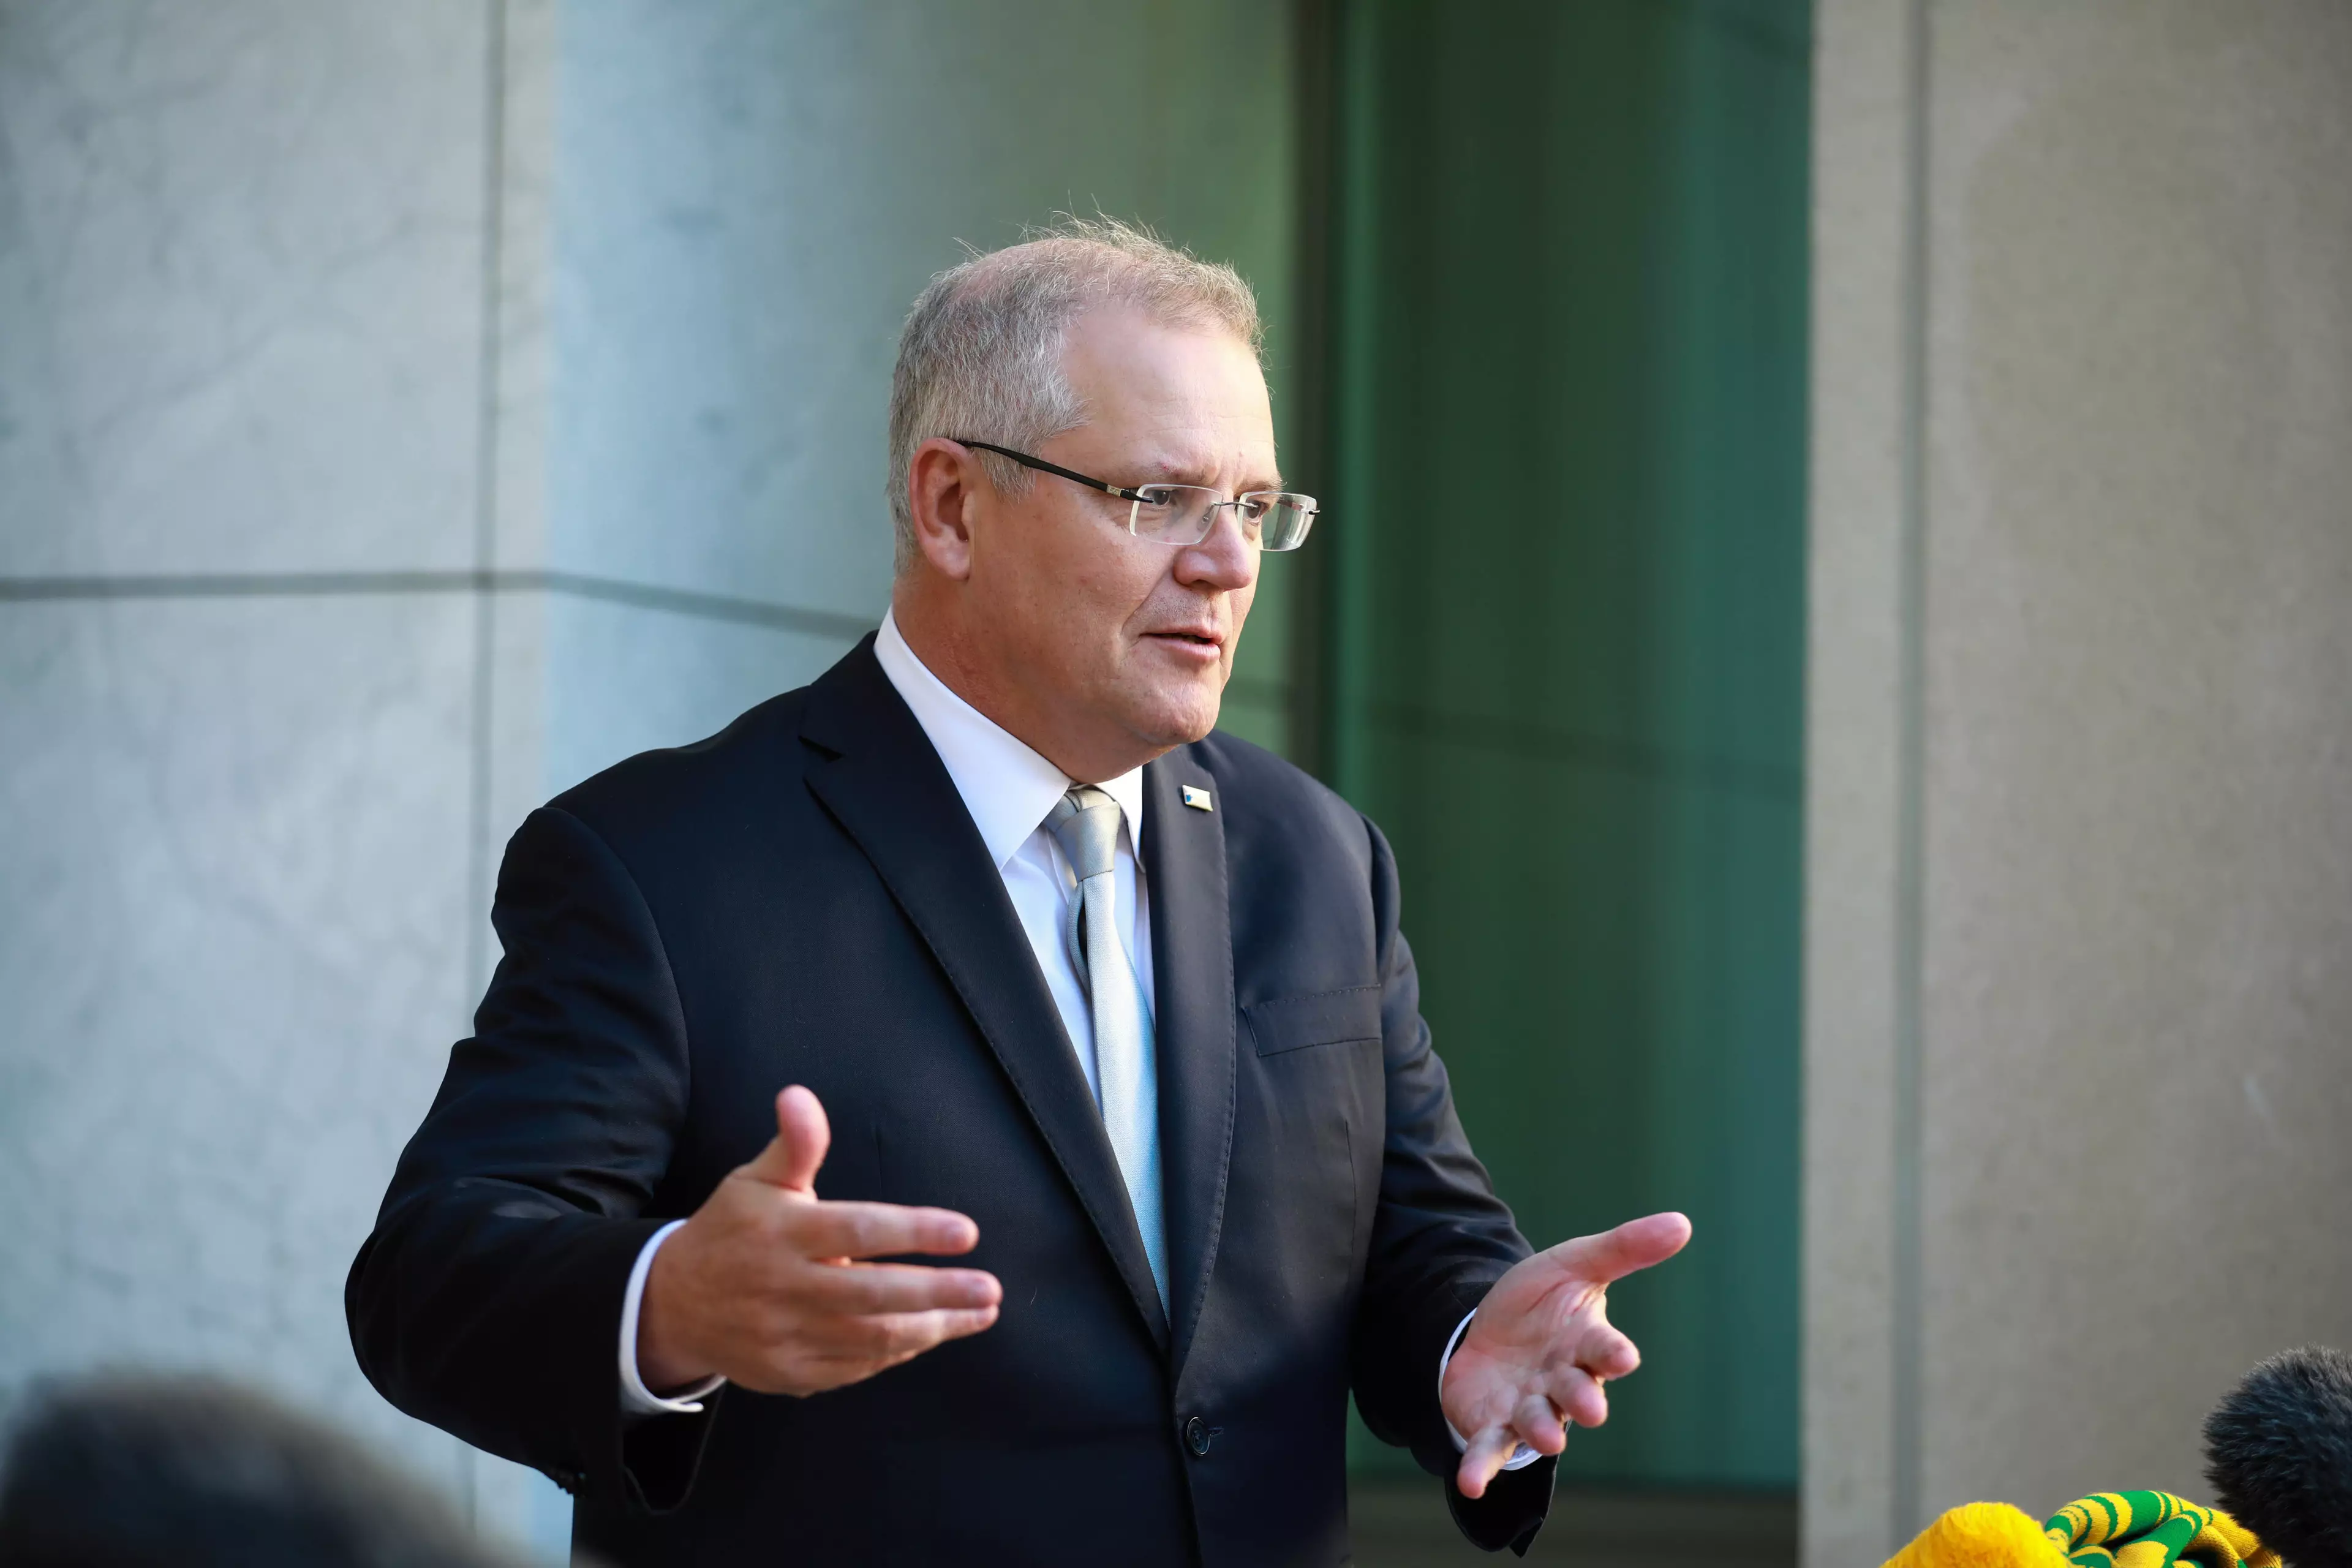 Scott Morrison also wants states to begin to open their borders.